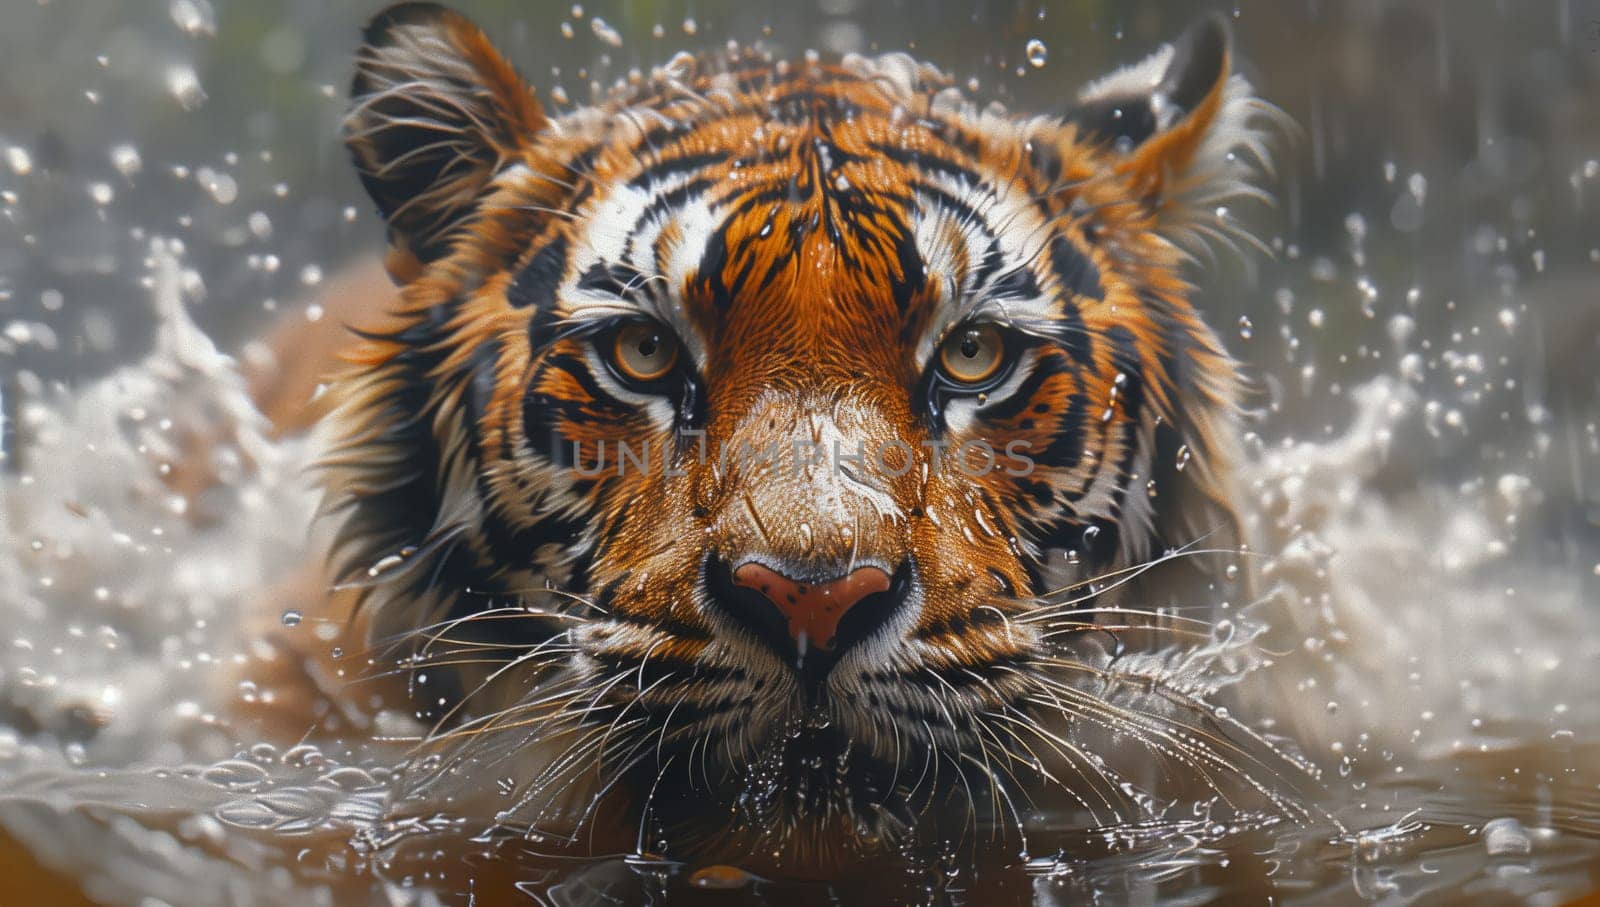 Siberian tiger swimming in water, gaze fixed on camera by richwolf